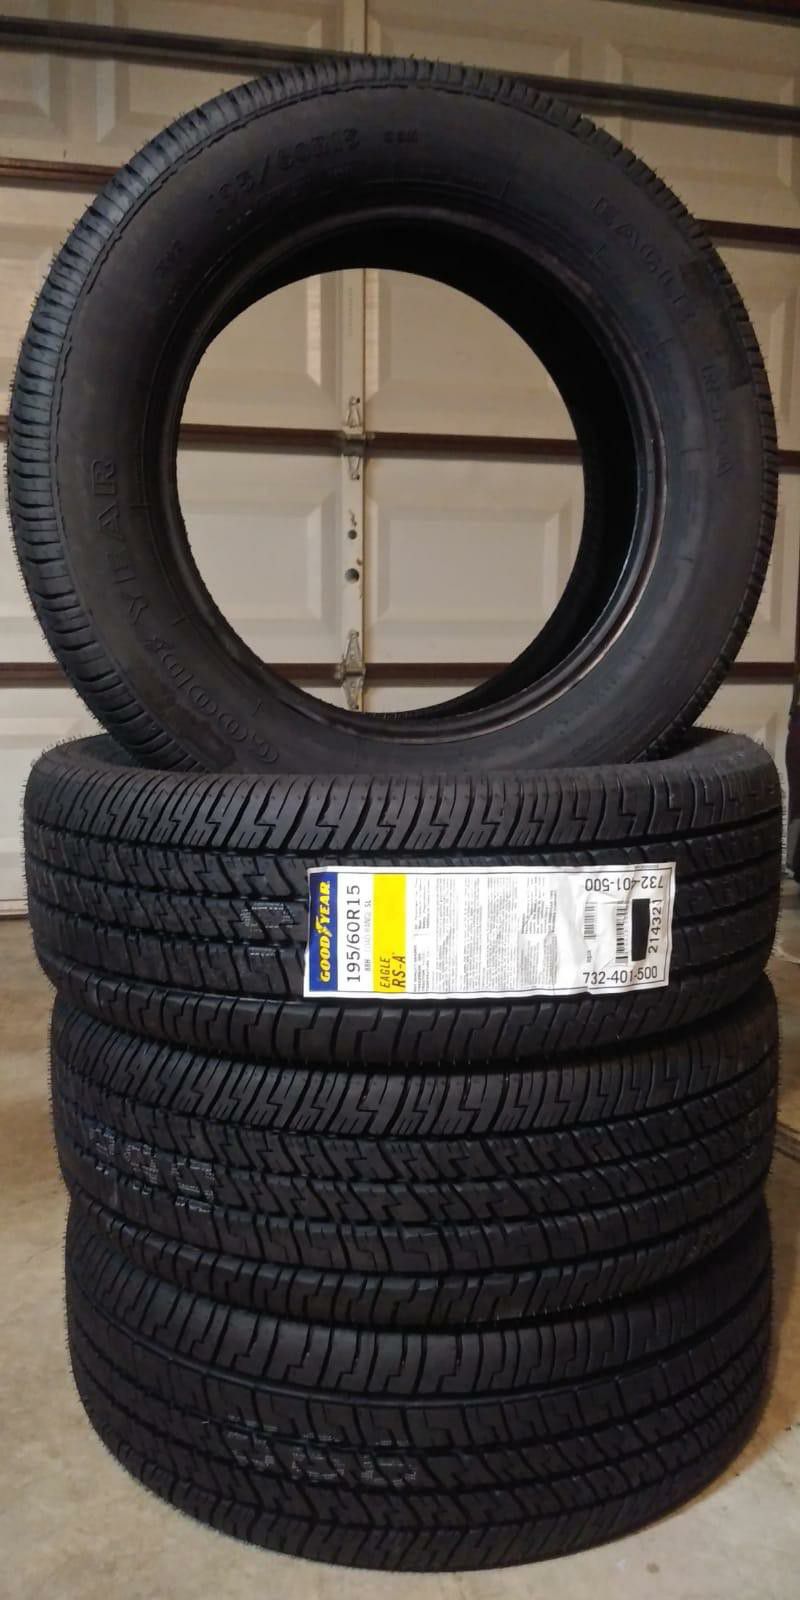 4 brand new goodyear tires 195/60r15